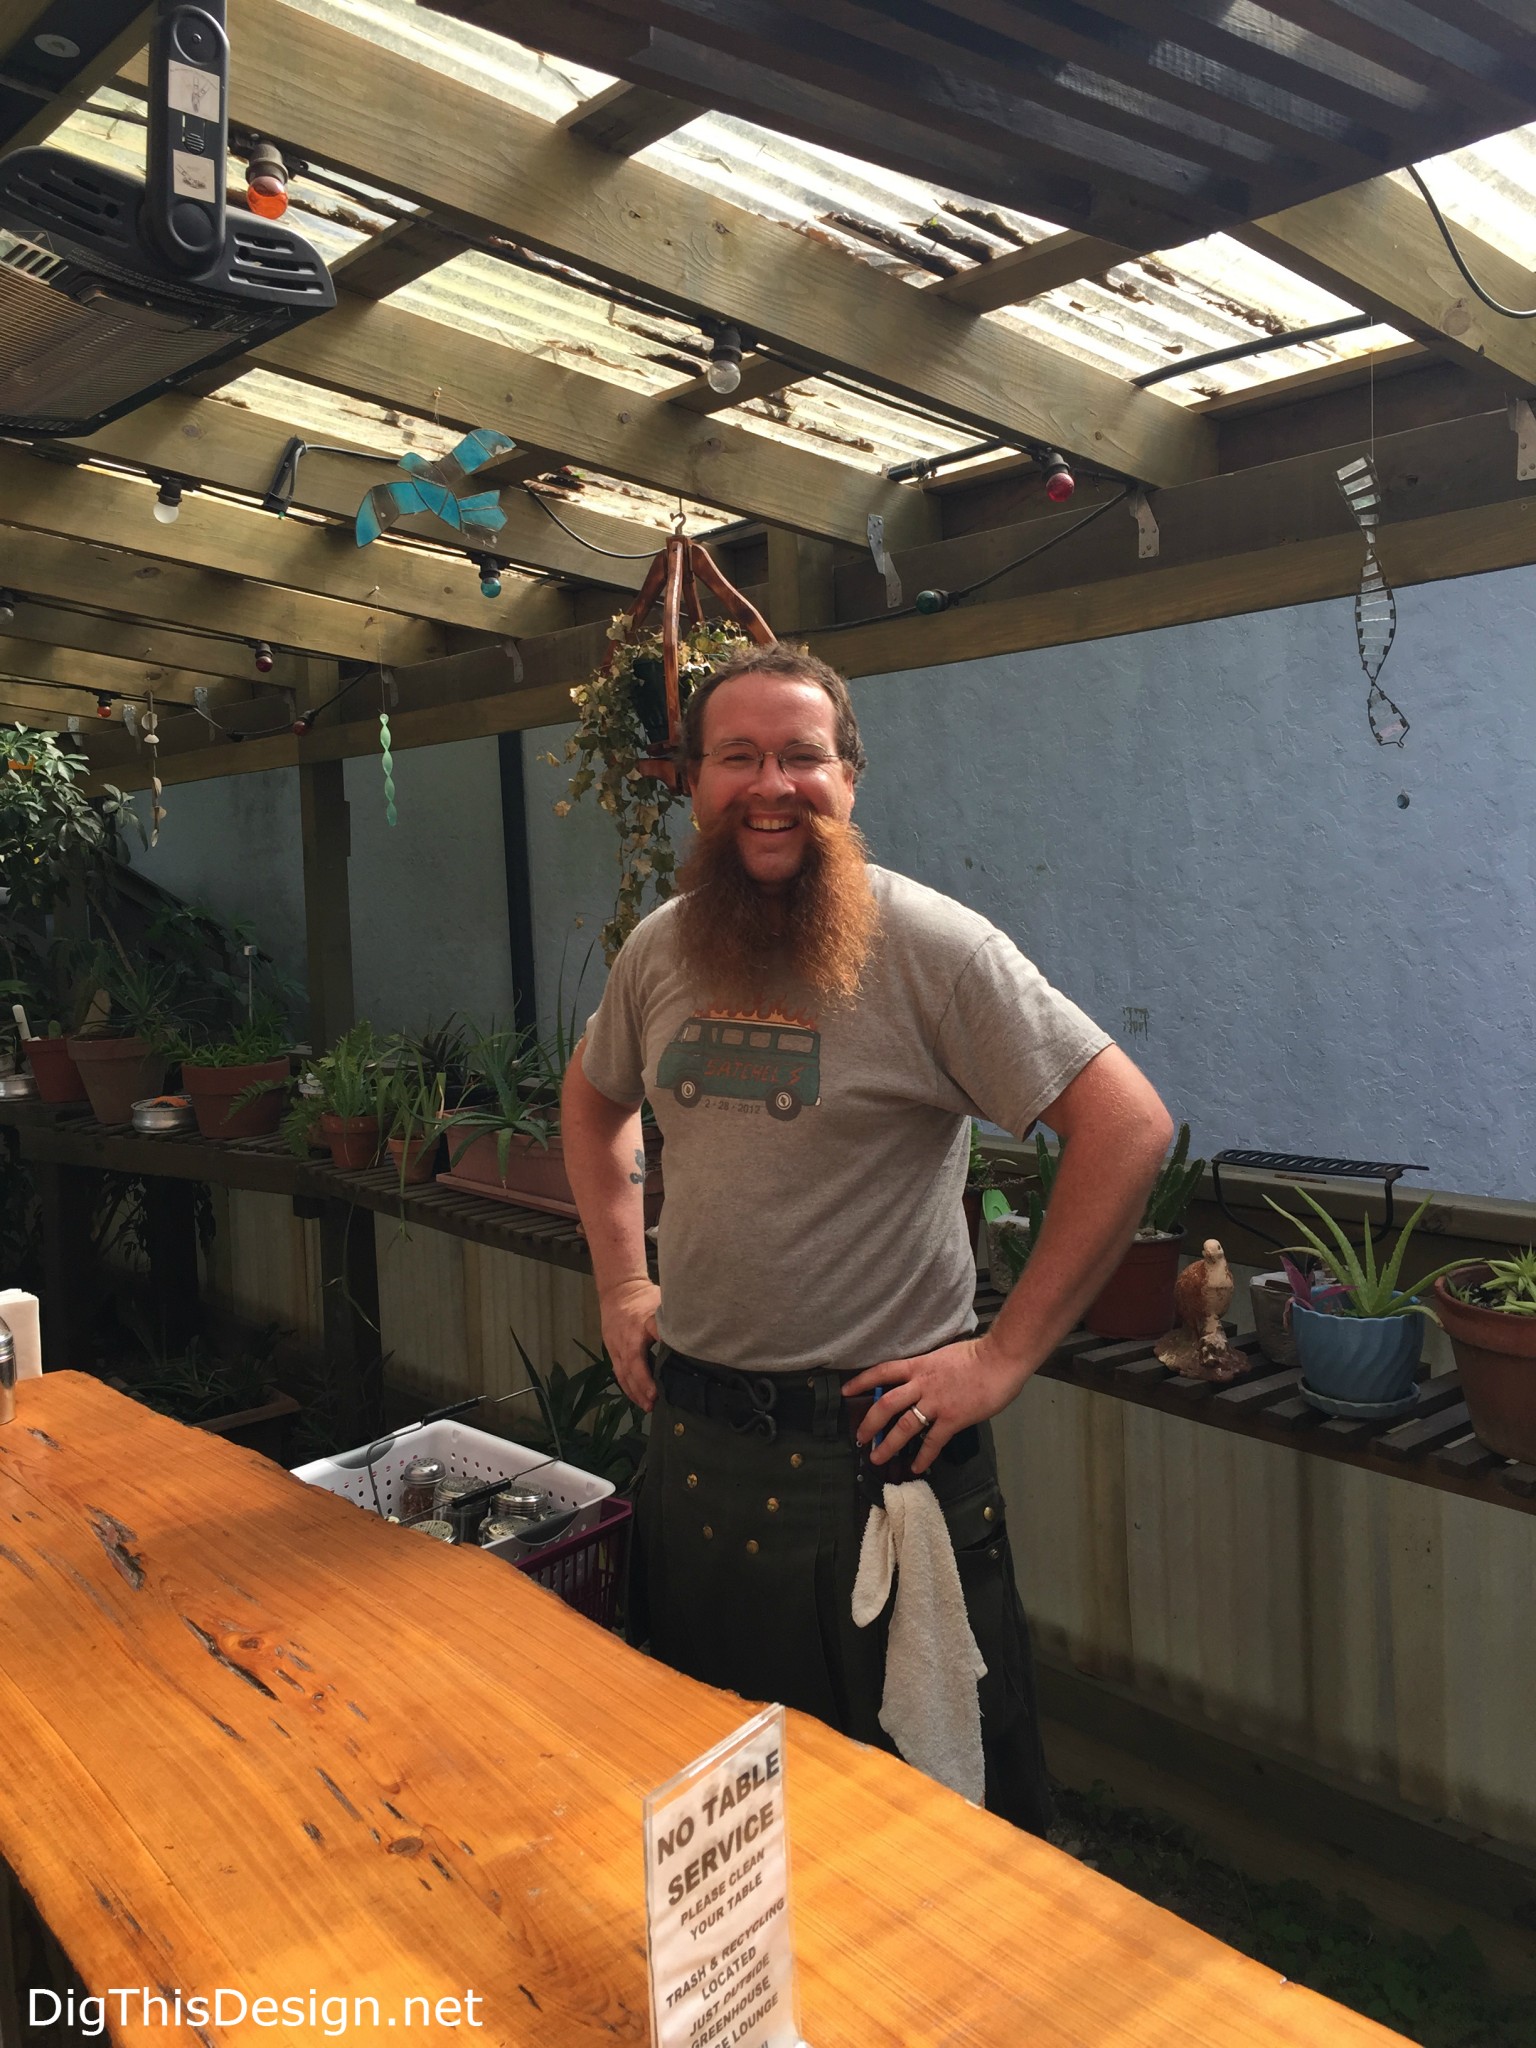 Satchel's Pizzeria and Junk Museum has a dine in greenhouse